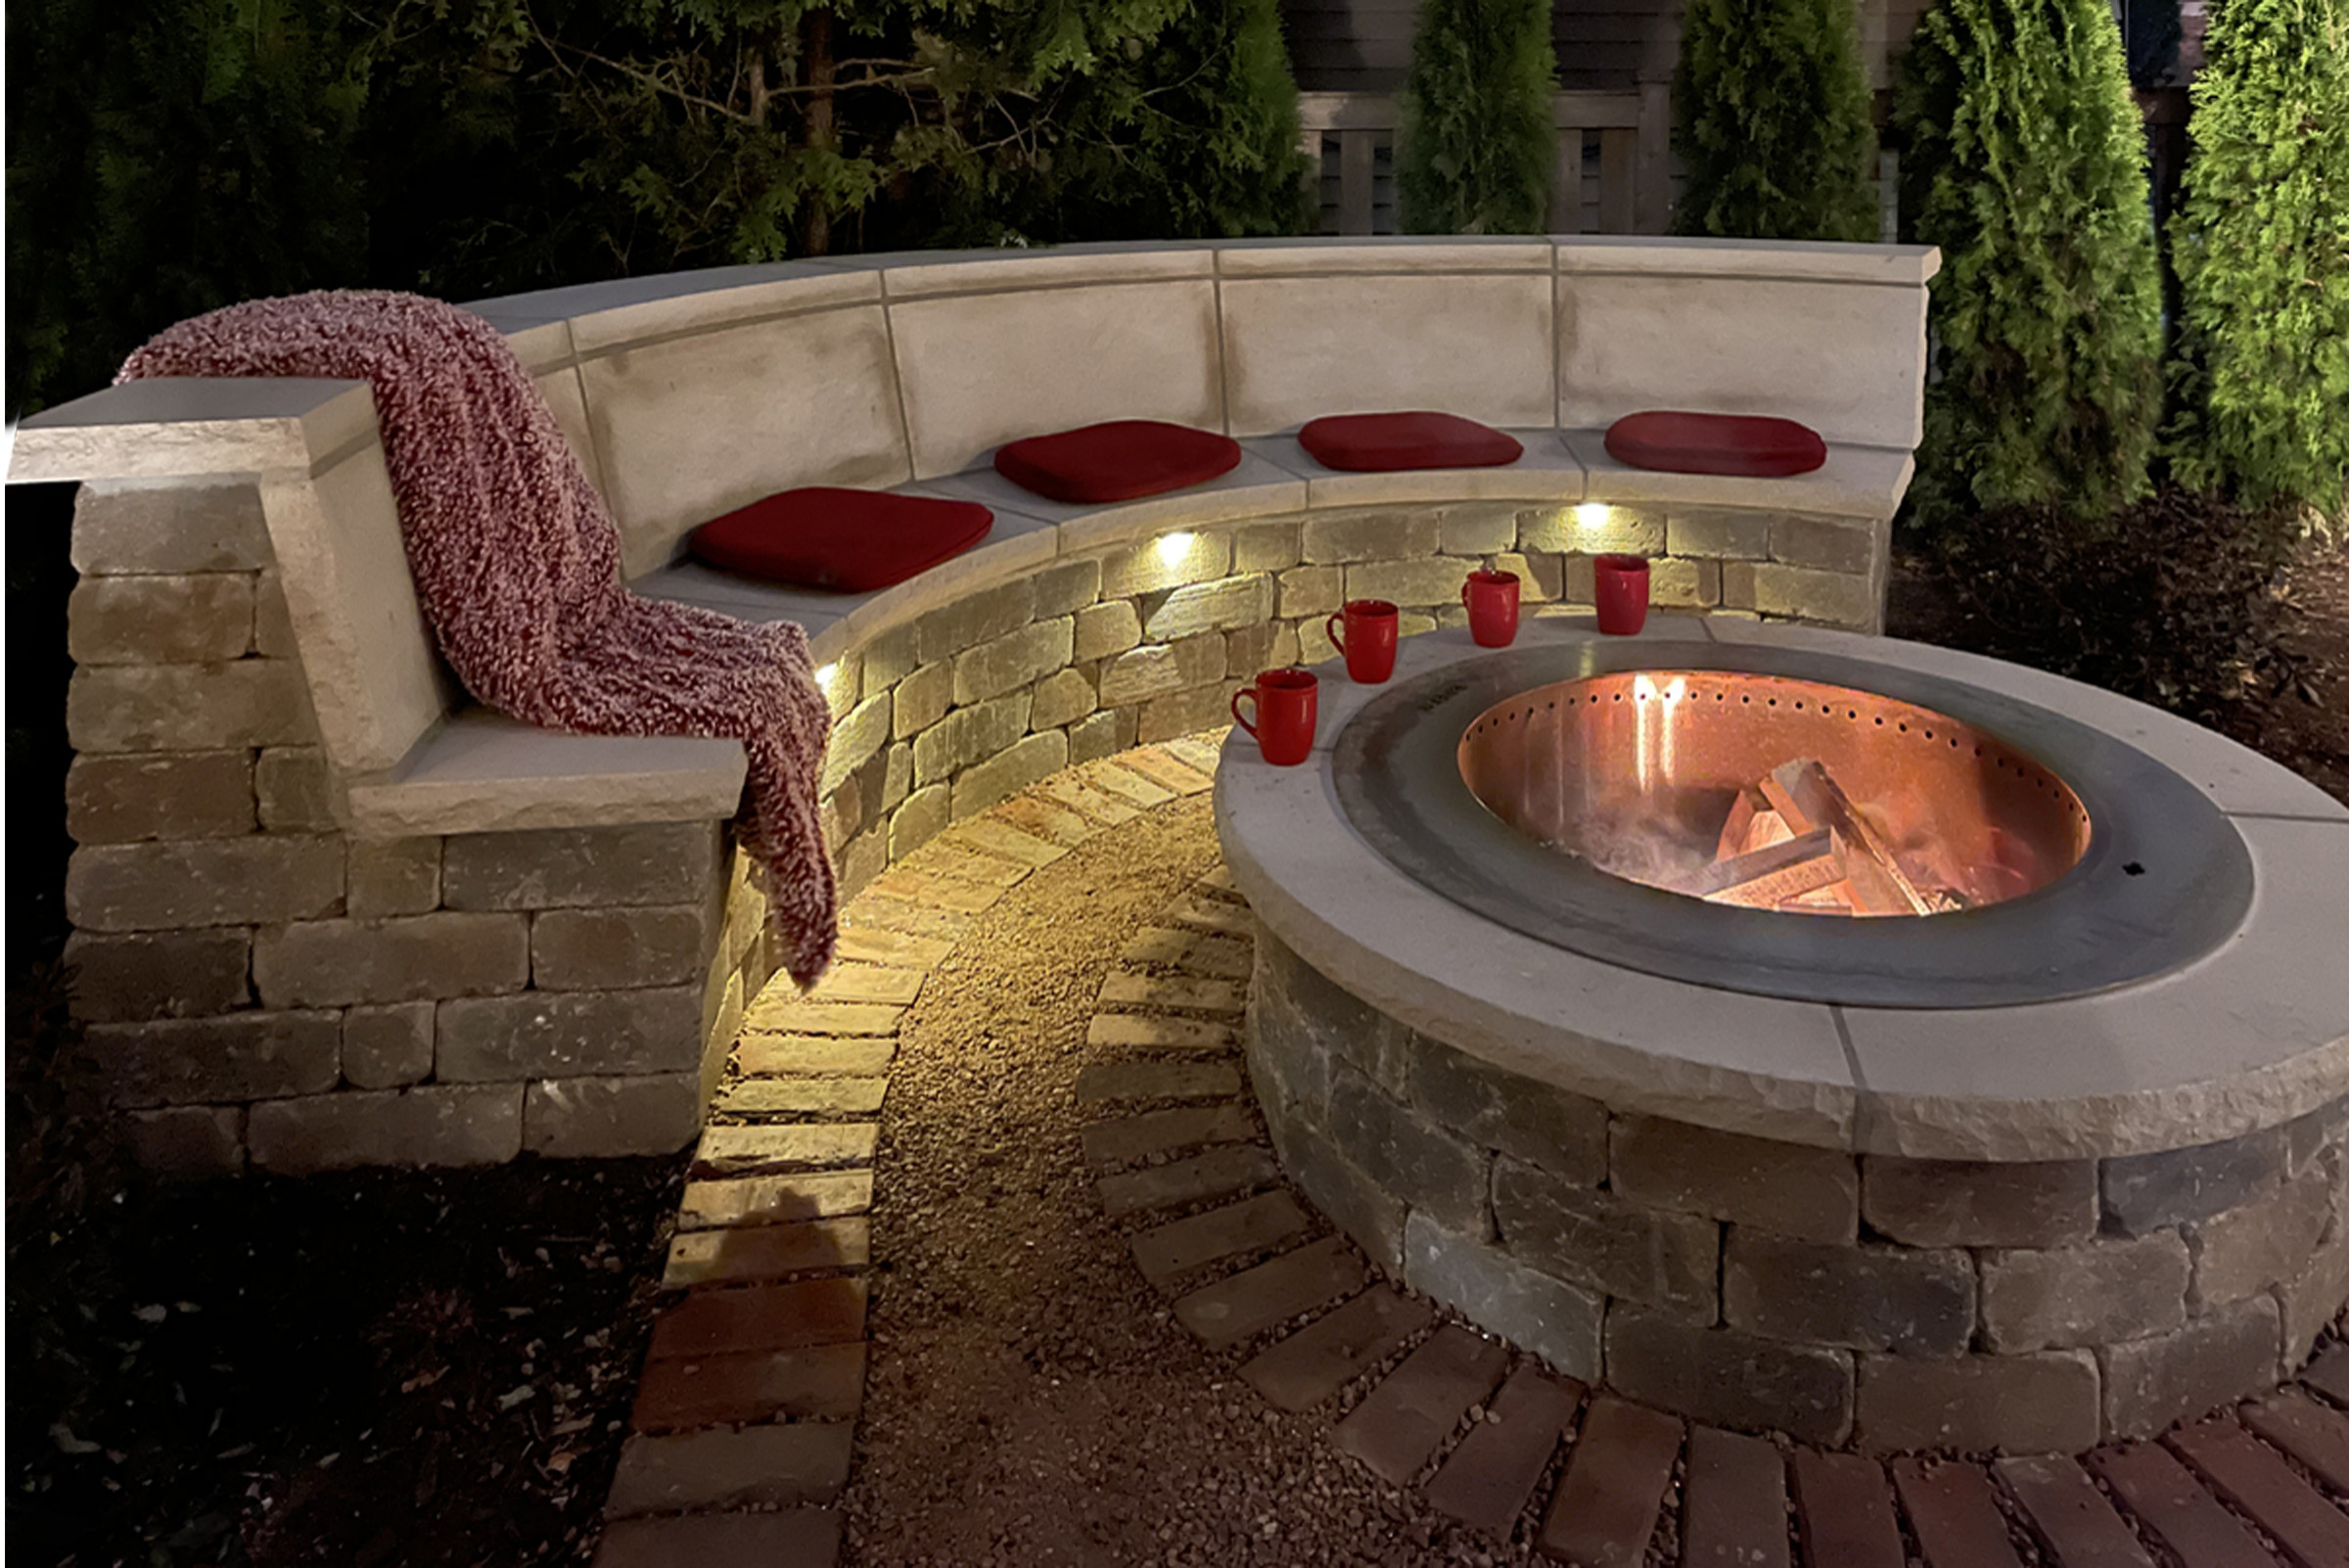 Heated Bench & Smokeless Fire Pit - Contemporary - Landscape - by Nature's  Perspective Landscaping | Houzz